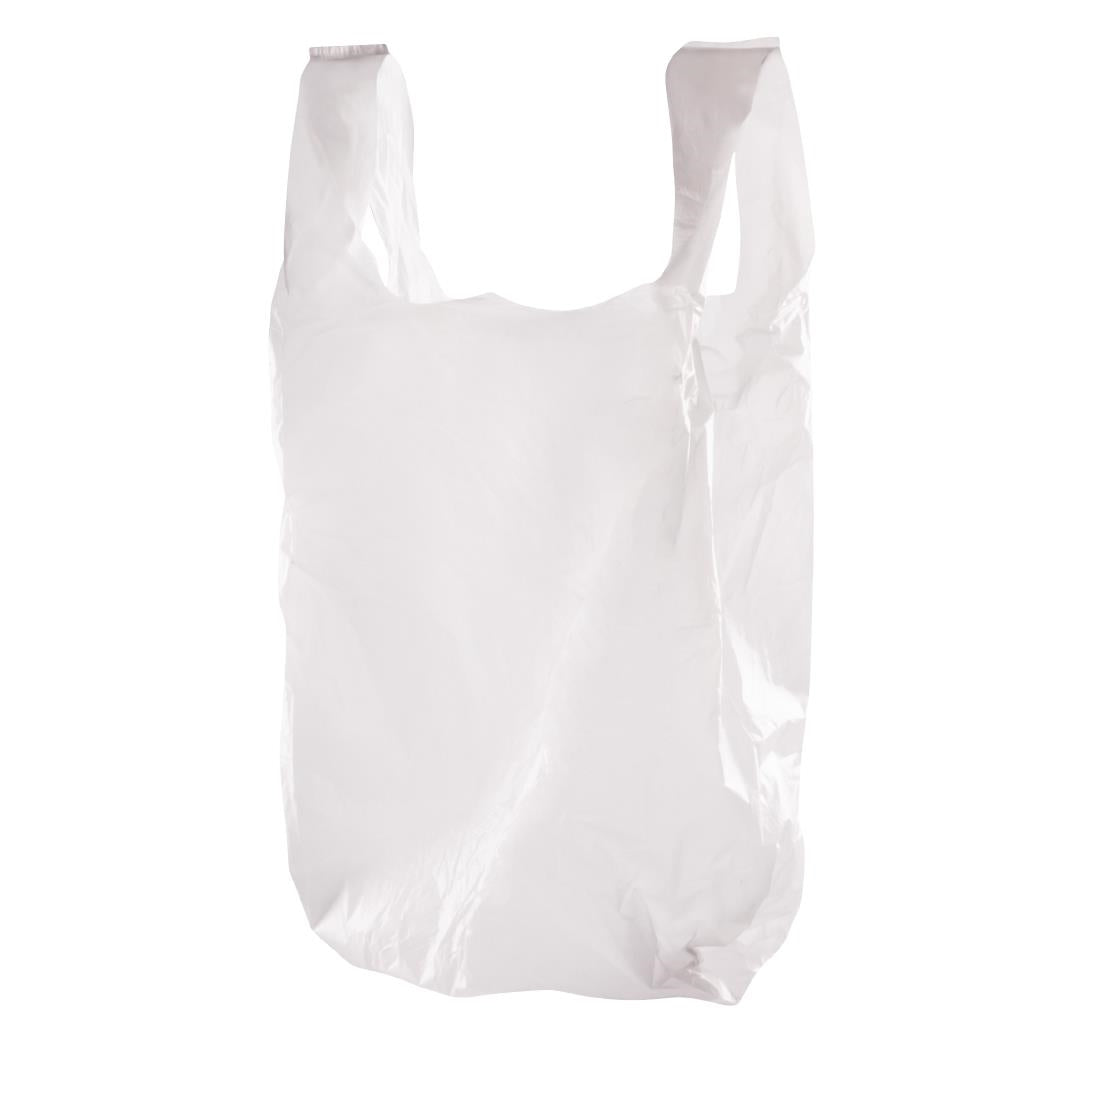 Large White Carrier Bags (Pack of 1000) JD Catering Equipment Solutions Ltd